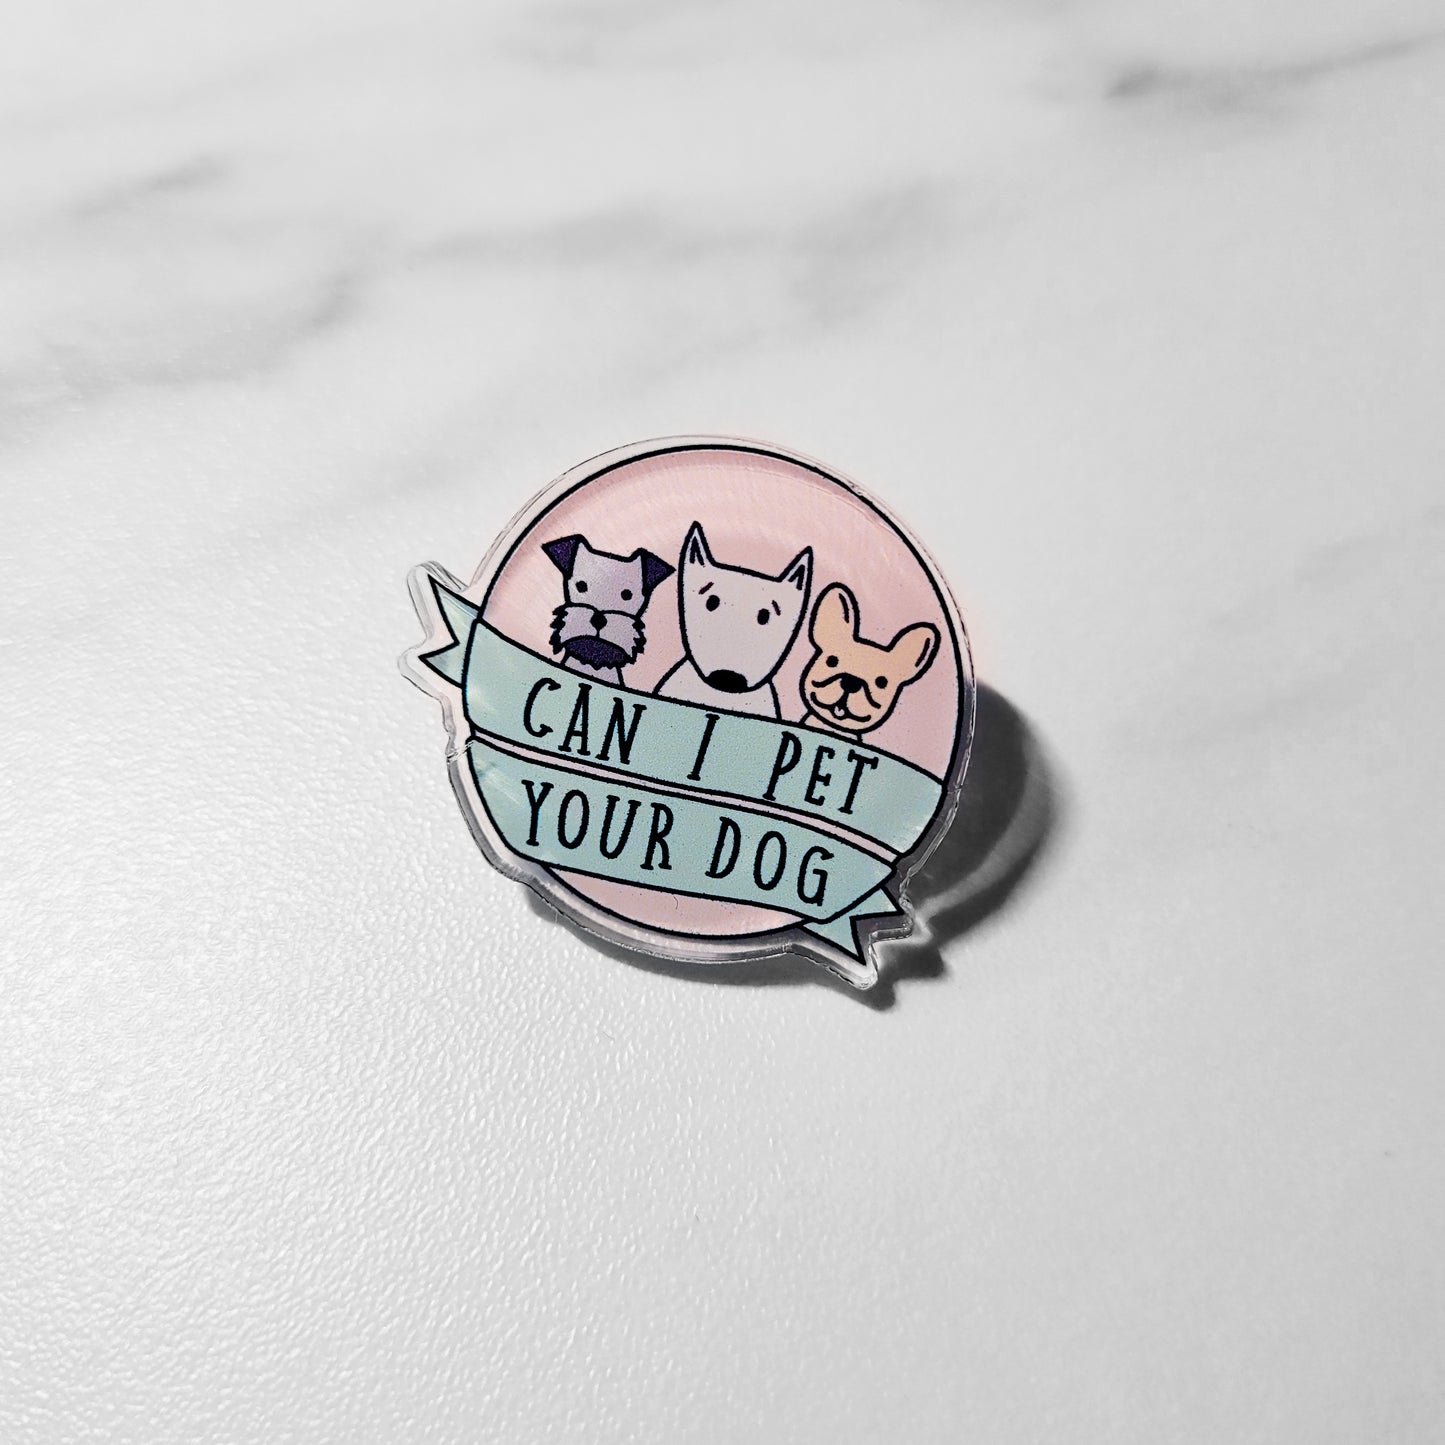 "Can I Pet Your Dog" Pin